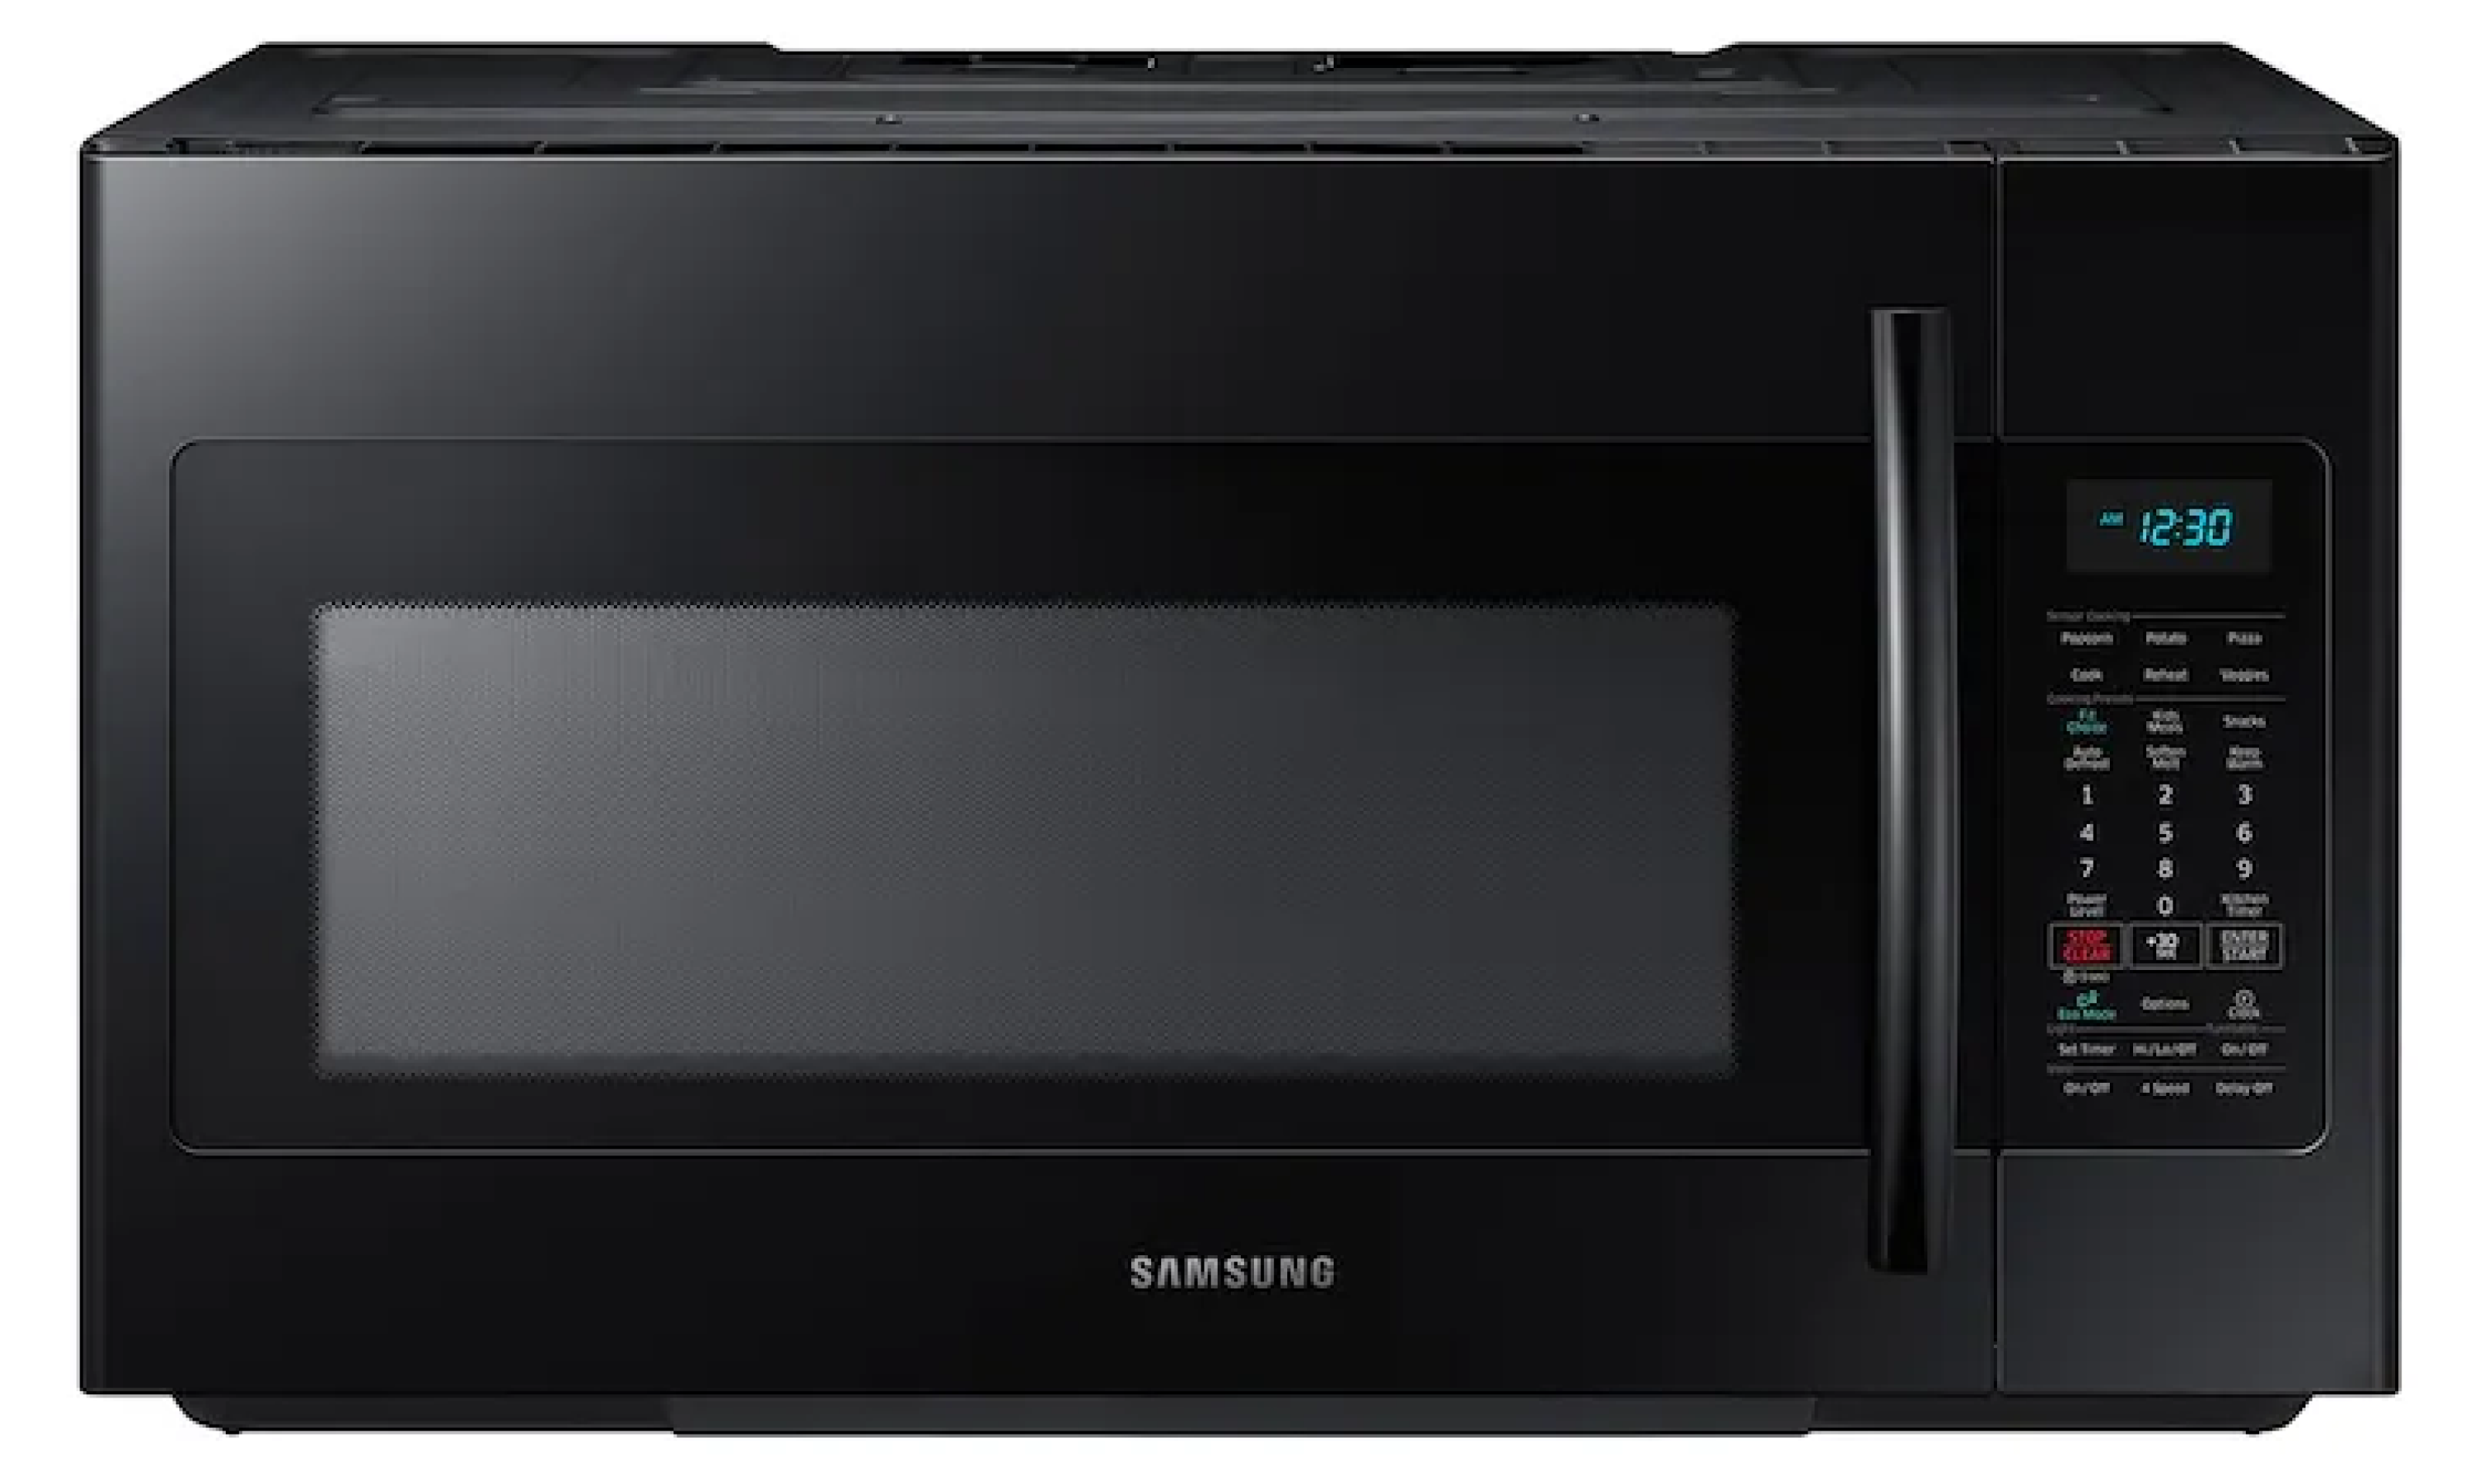 Samsung 1.8 cu. ft. Over-the-Range Microwave with Sensor Cooking in Black - ME18H704SFB